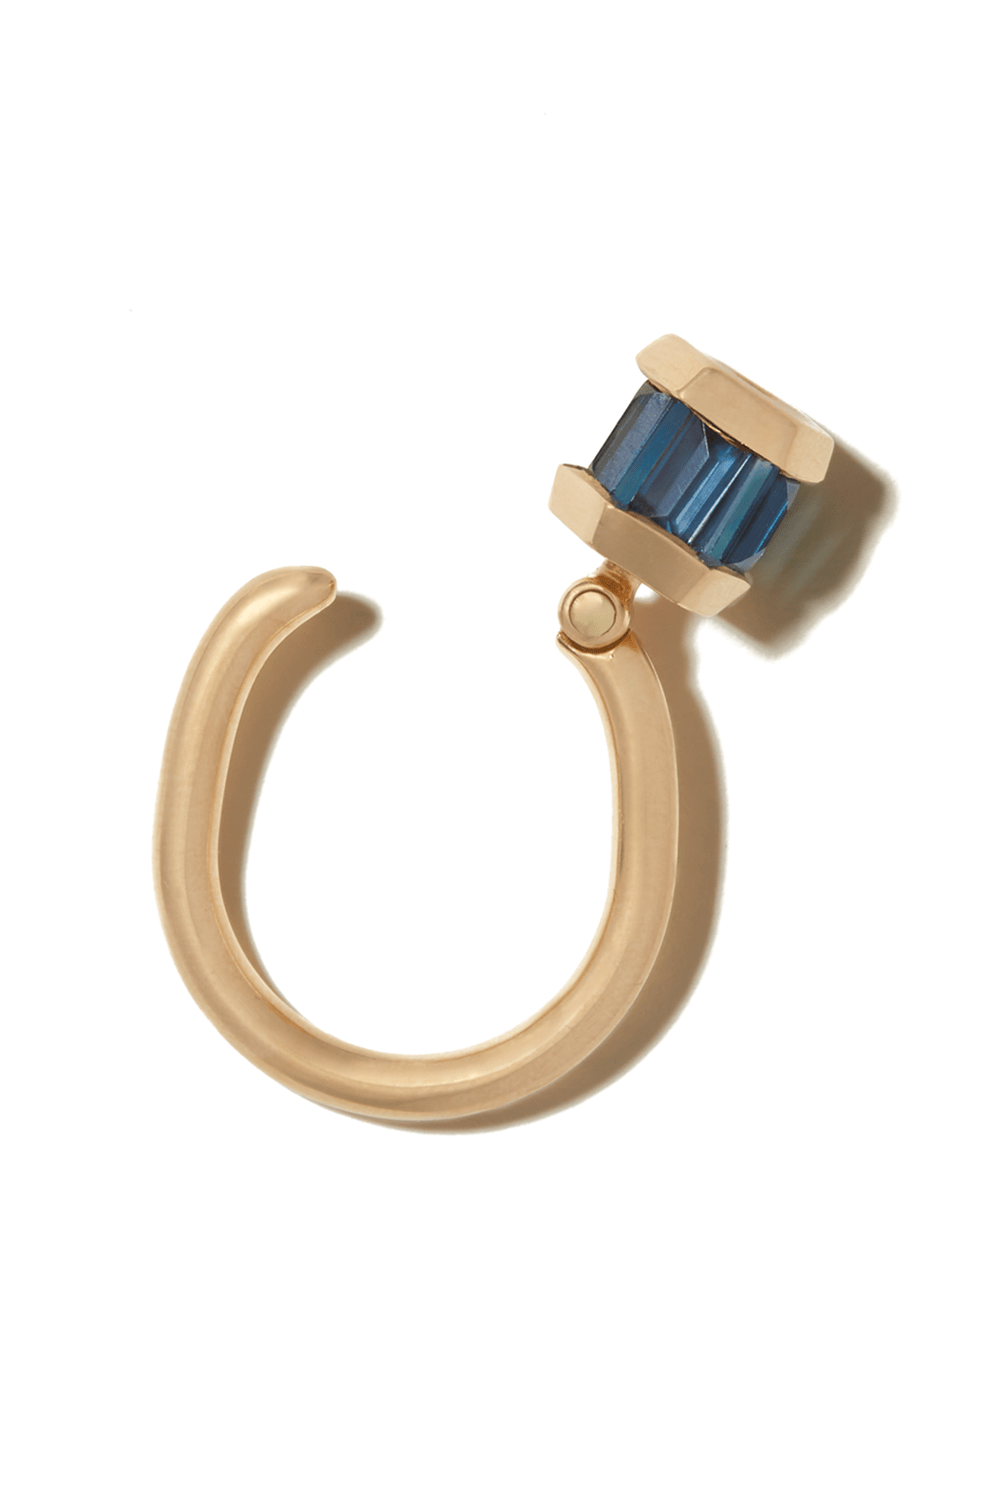 MARLA AARON-Total Baguette Trundle Lock Ring-YELLOW GOLD